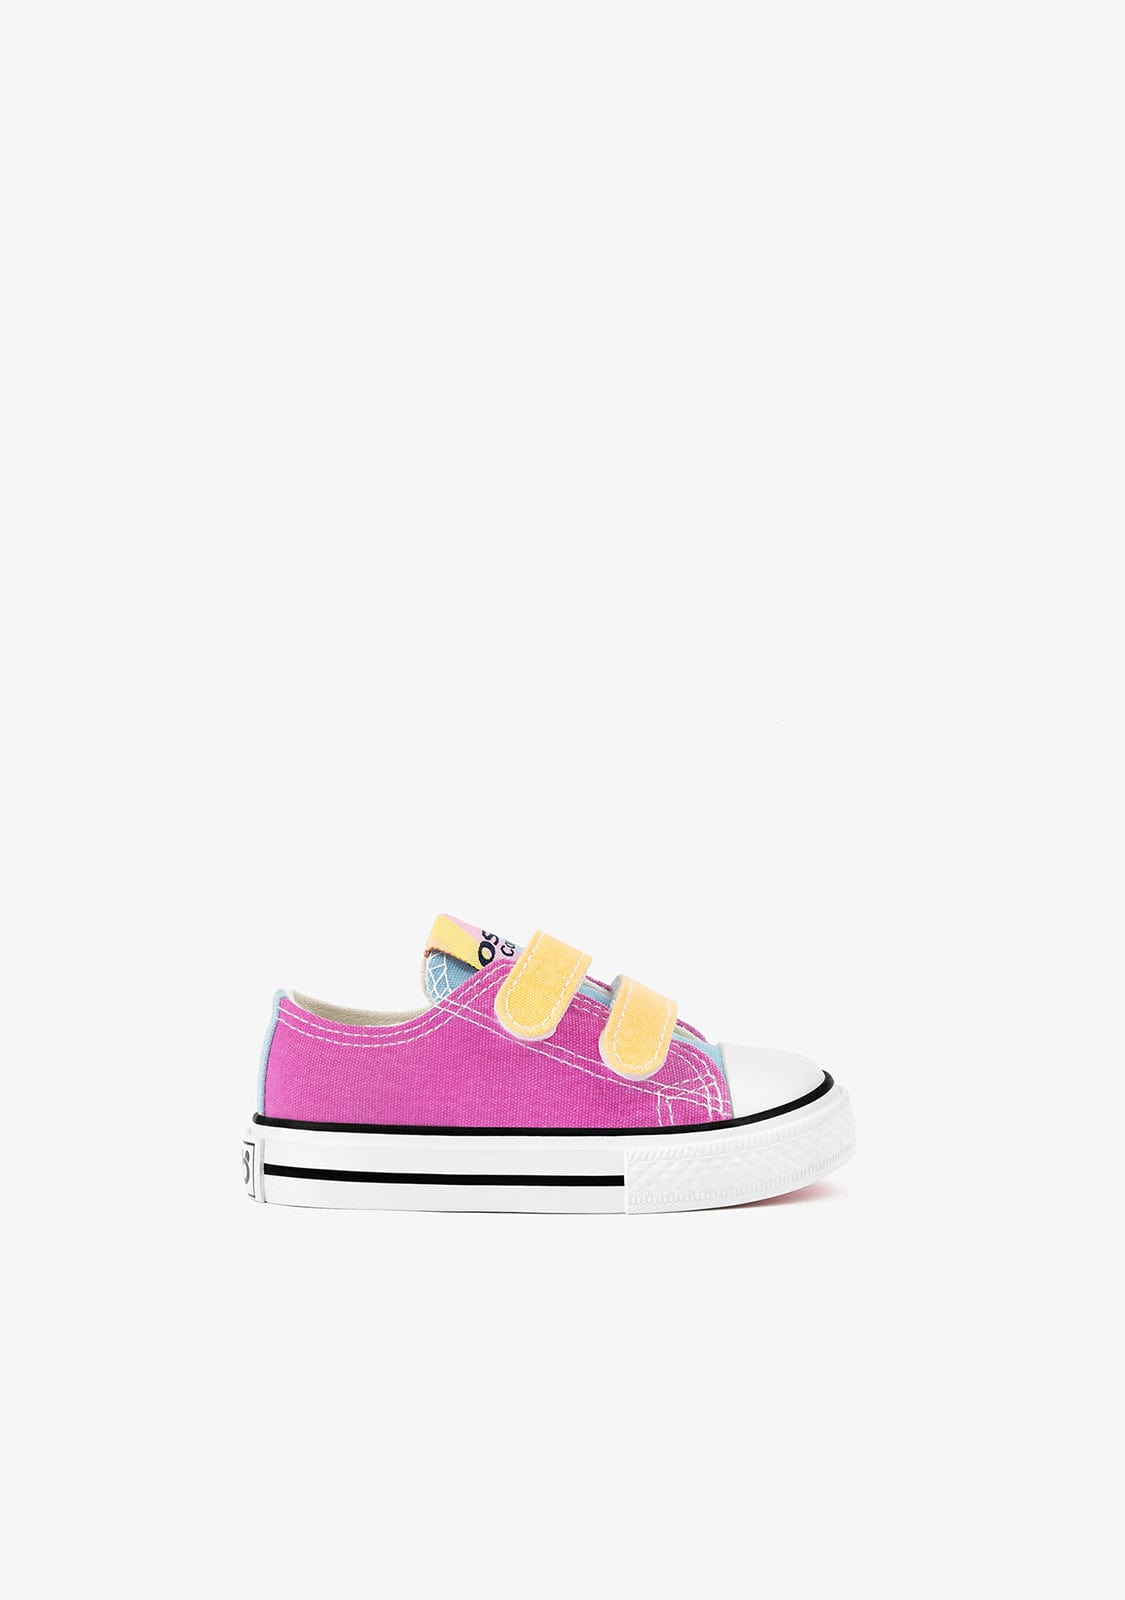 OSITO Shoes Baby's Multicolor Sunlight Sneakers